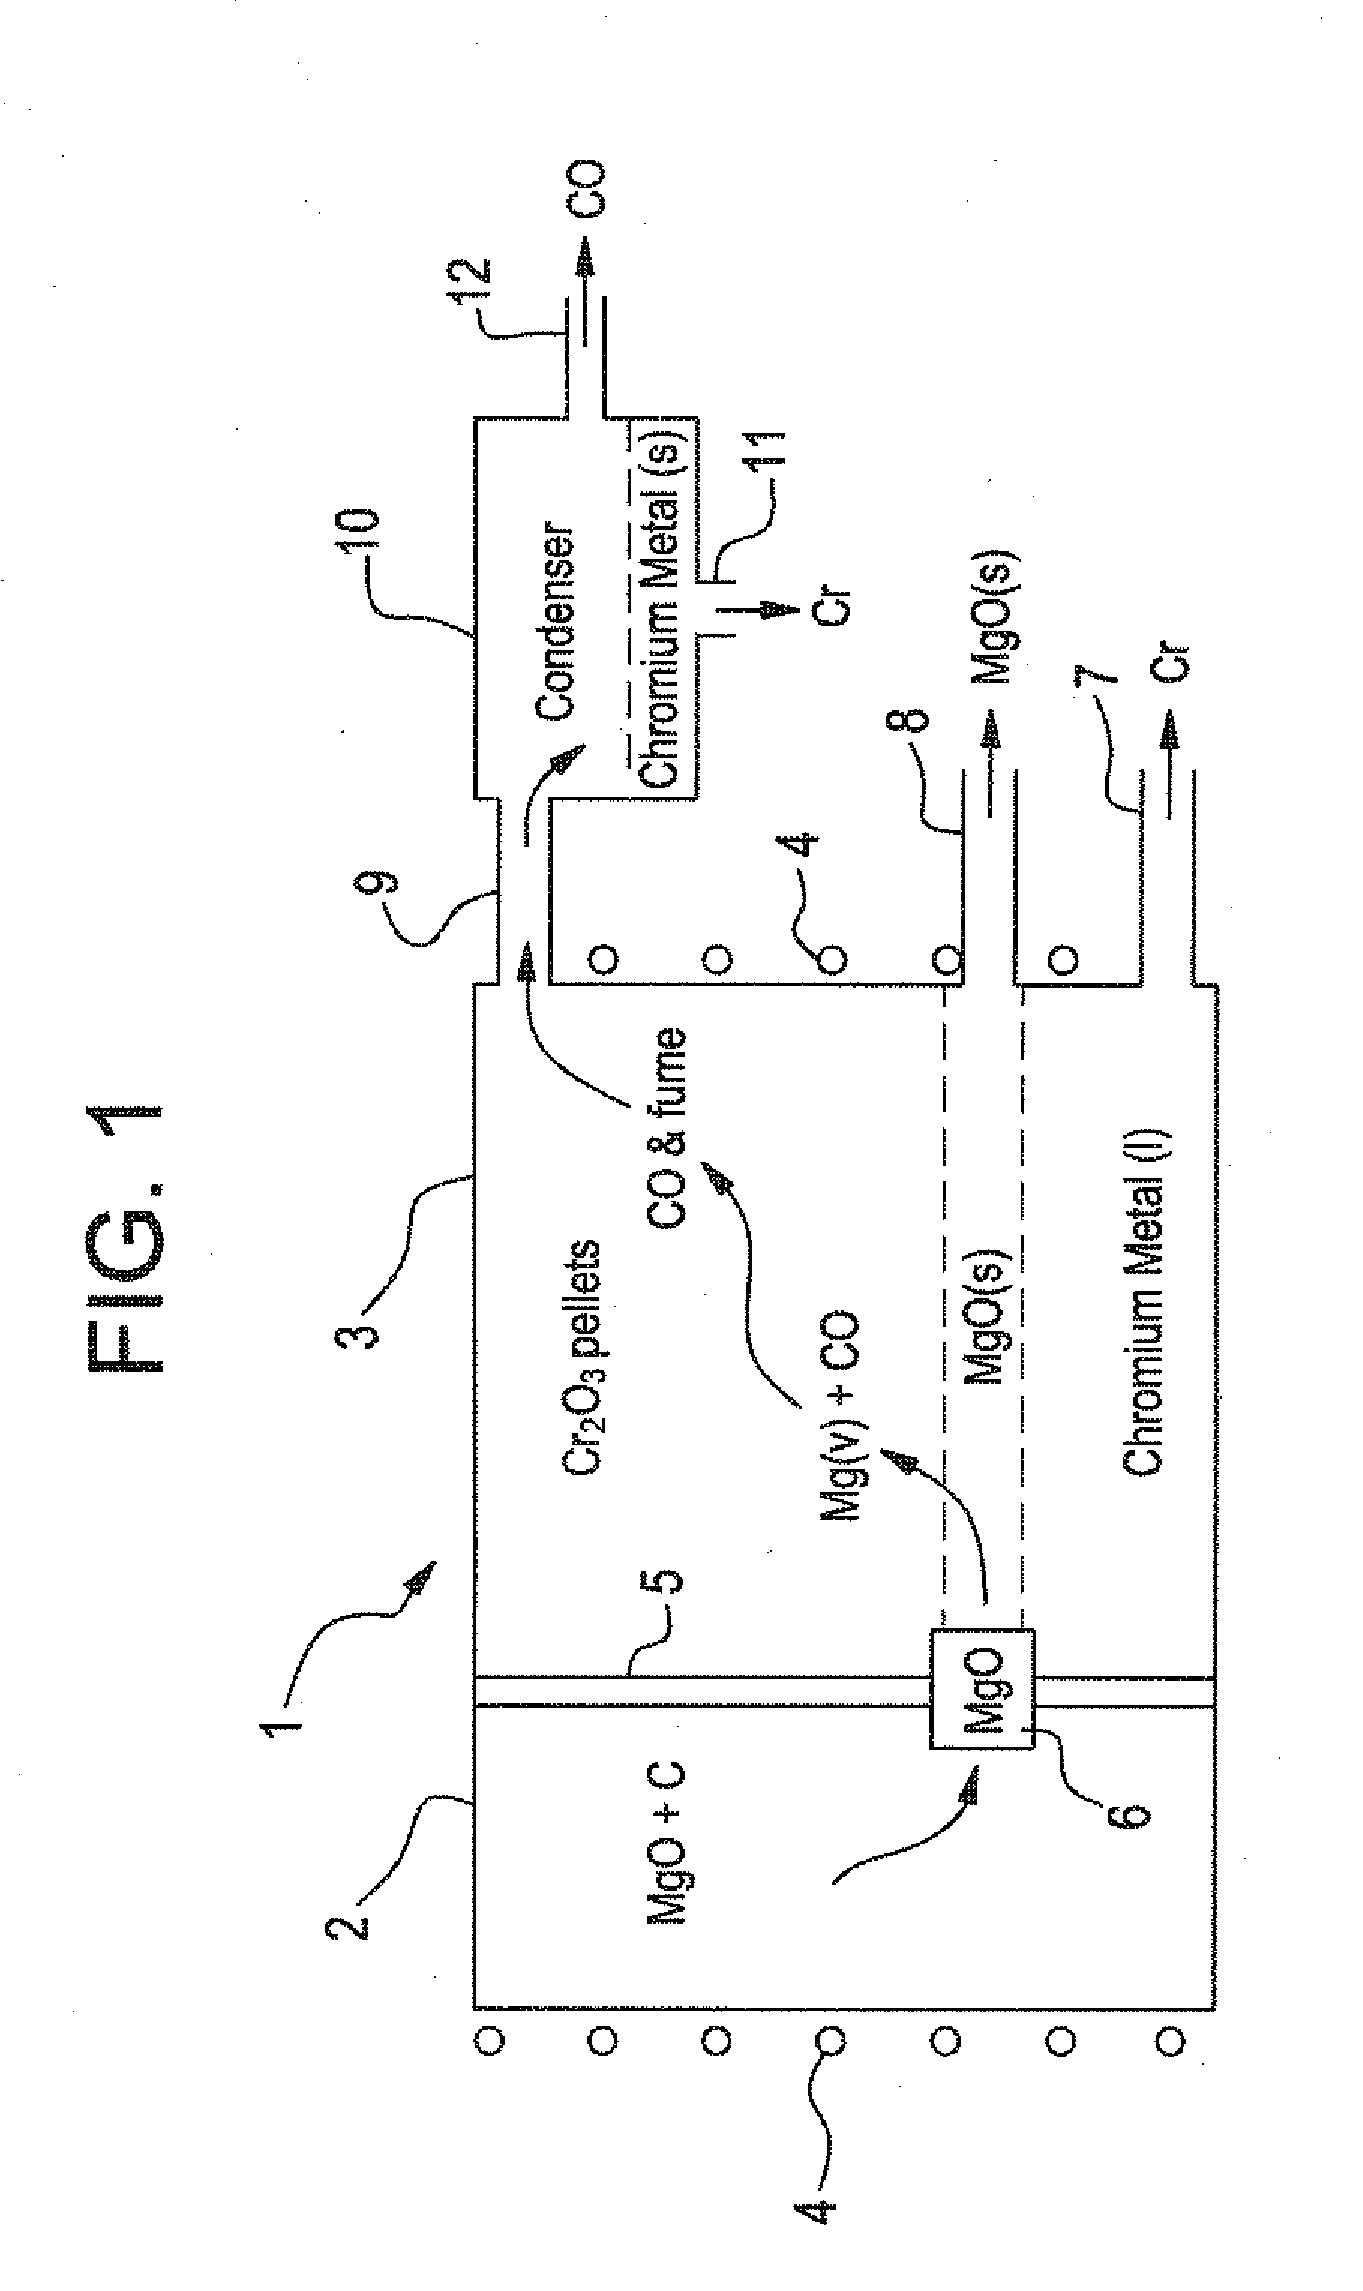 Method and apparatus for high temperature production of metals